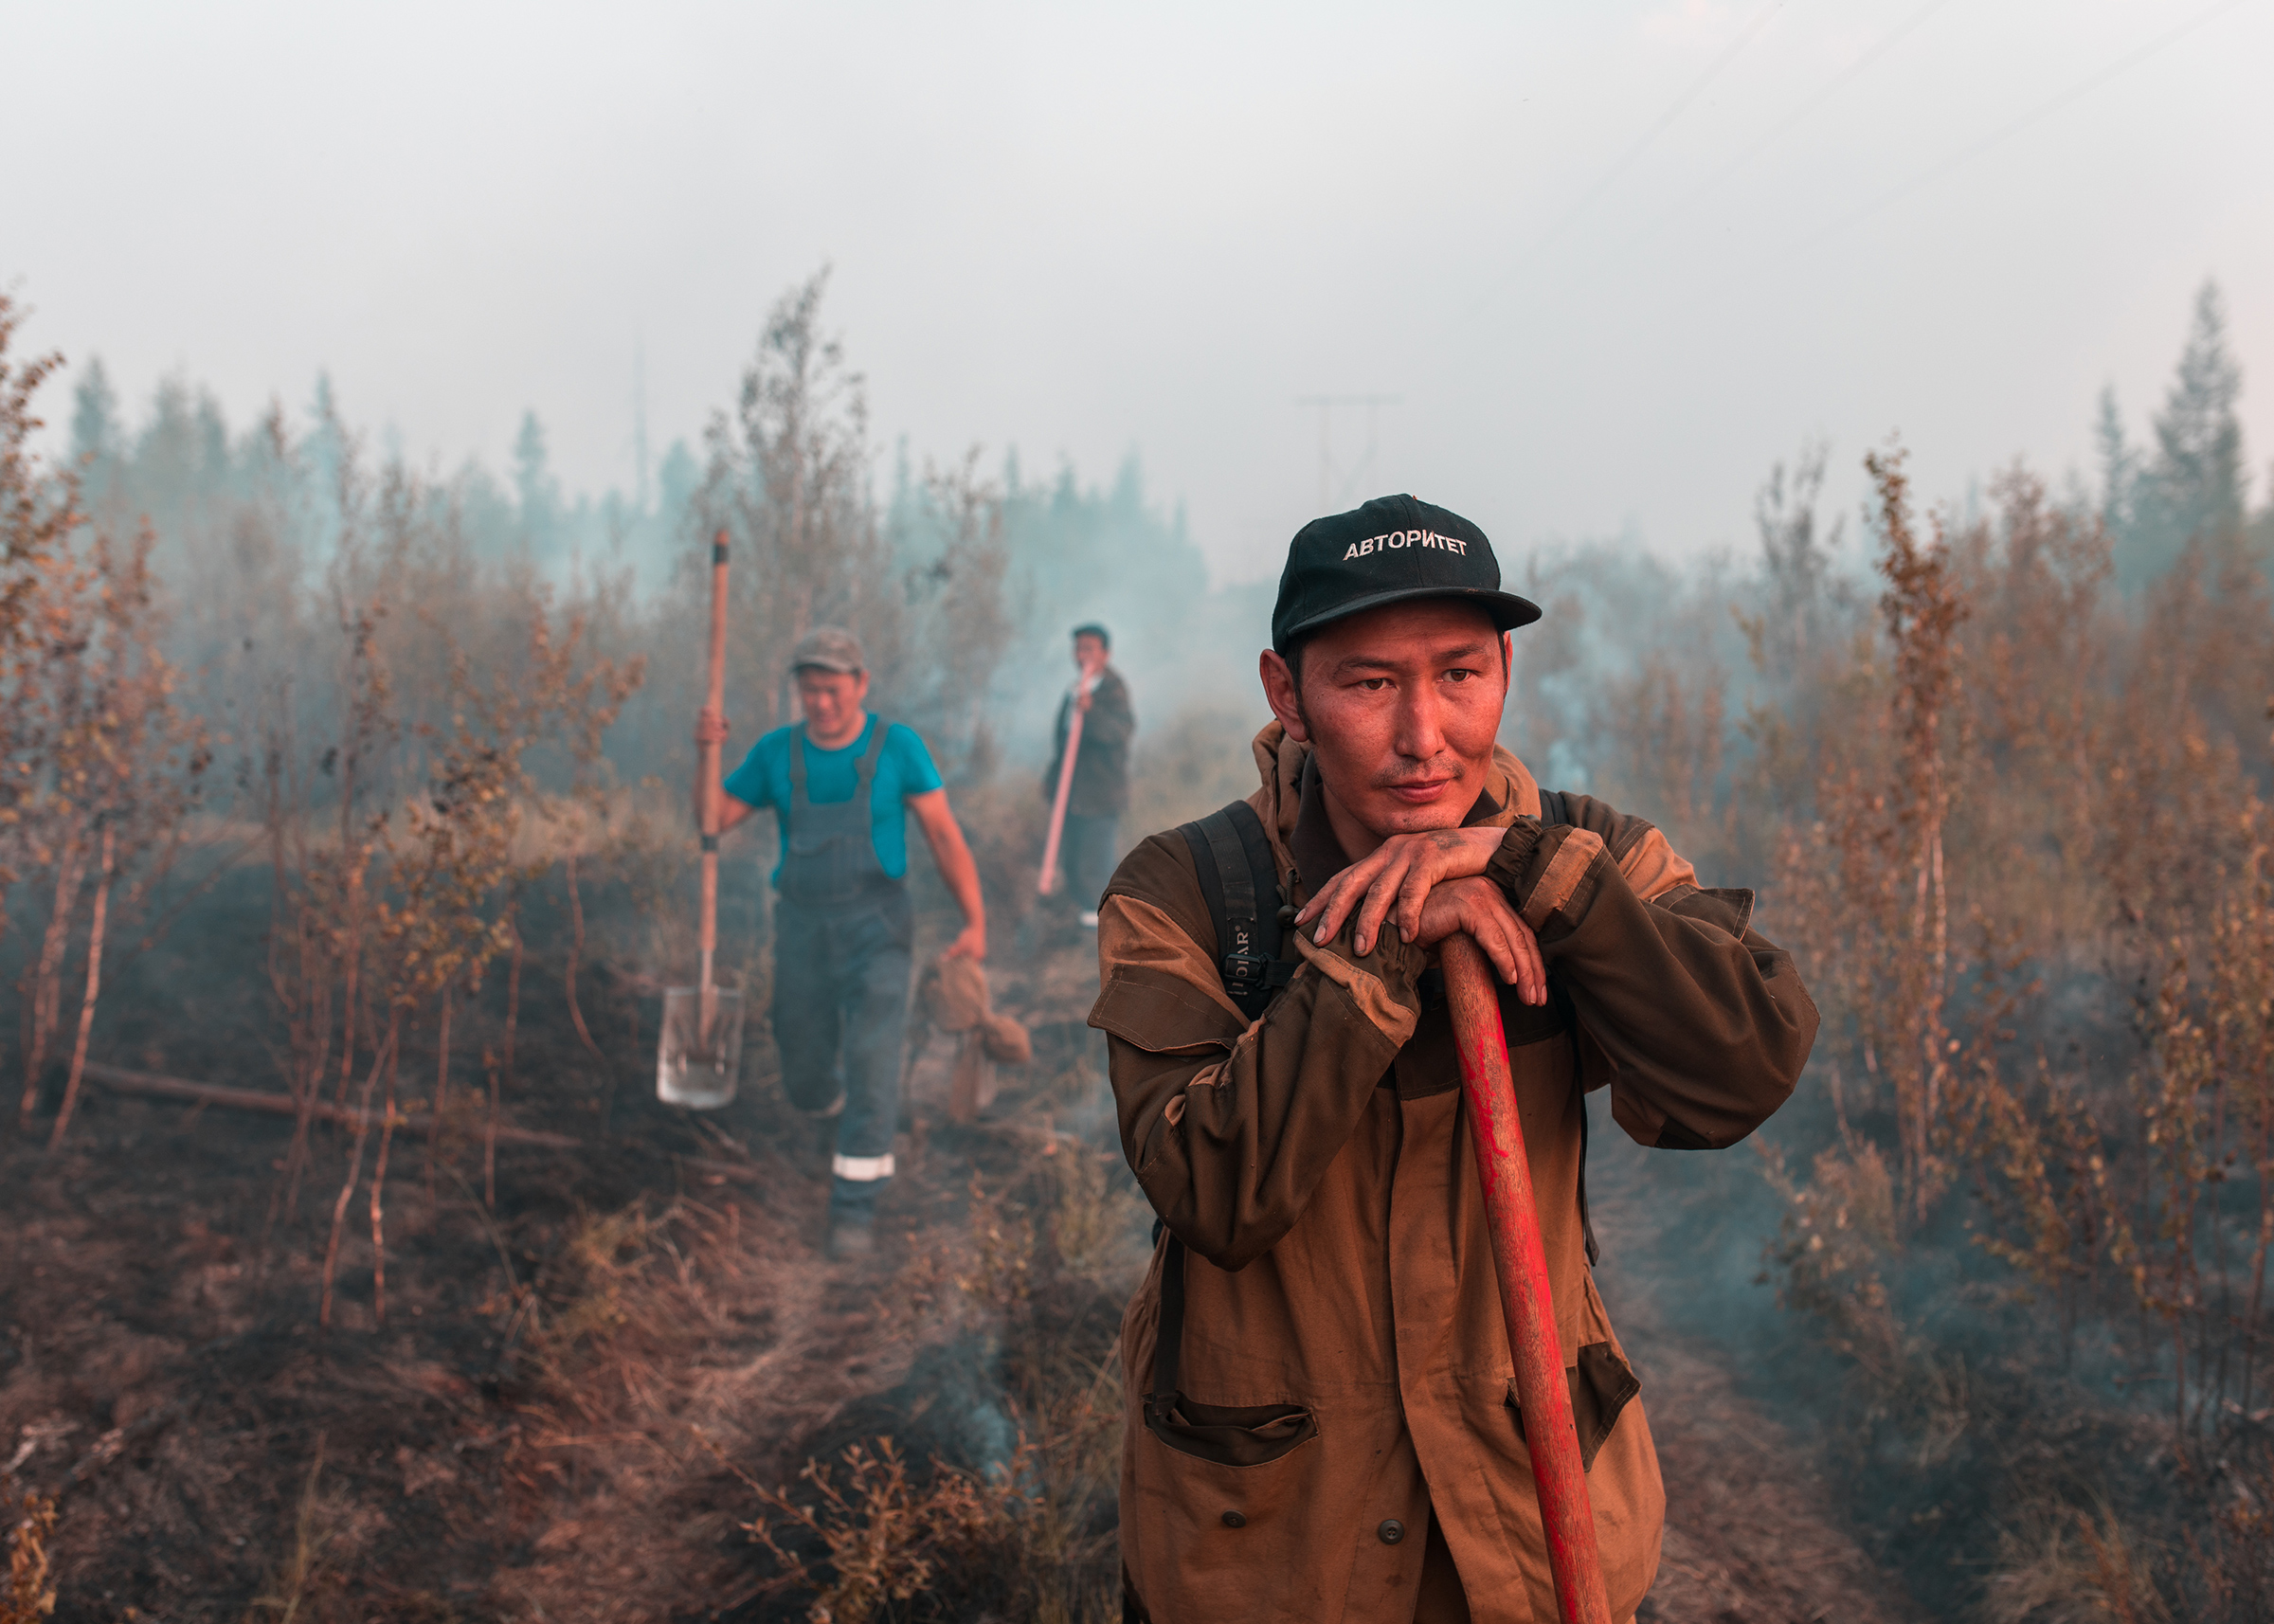 Alexander Yakovlev, 40, a volunteer from the village of Kyuerelyakh, together with his 18-year-old son Markel, has been working to extinguish wildfires near his home since early in the summer. (Alexey Vasilyev)